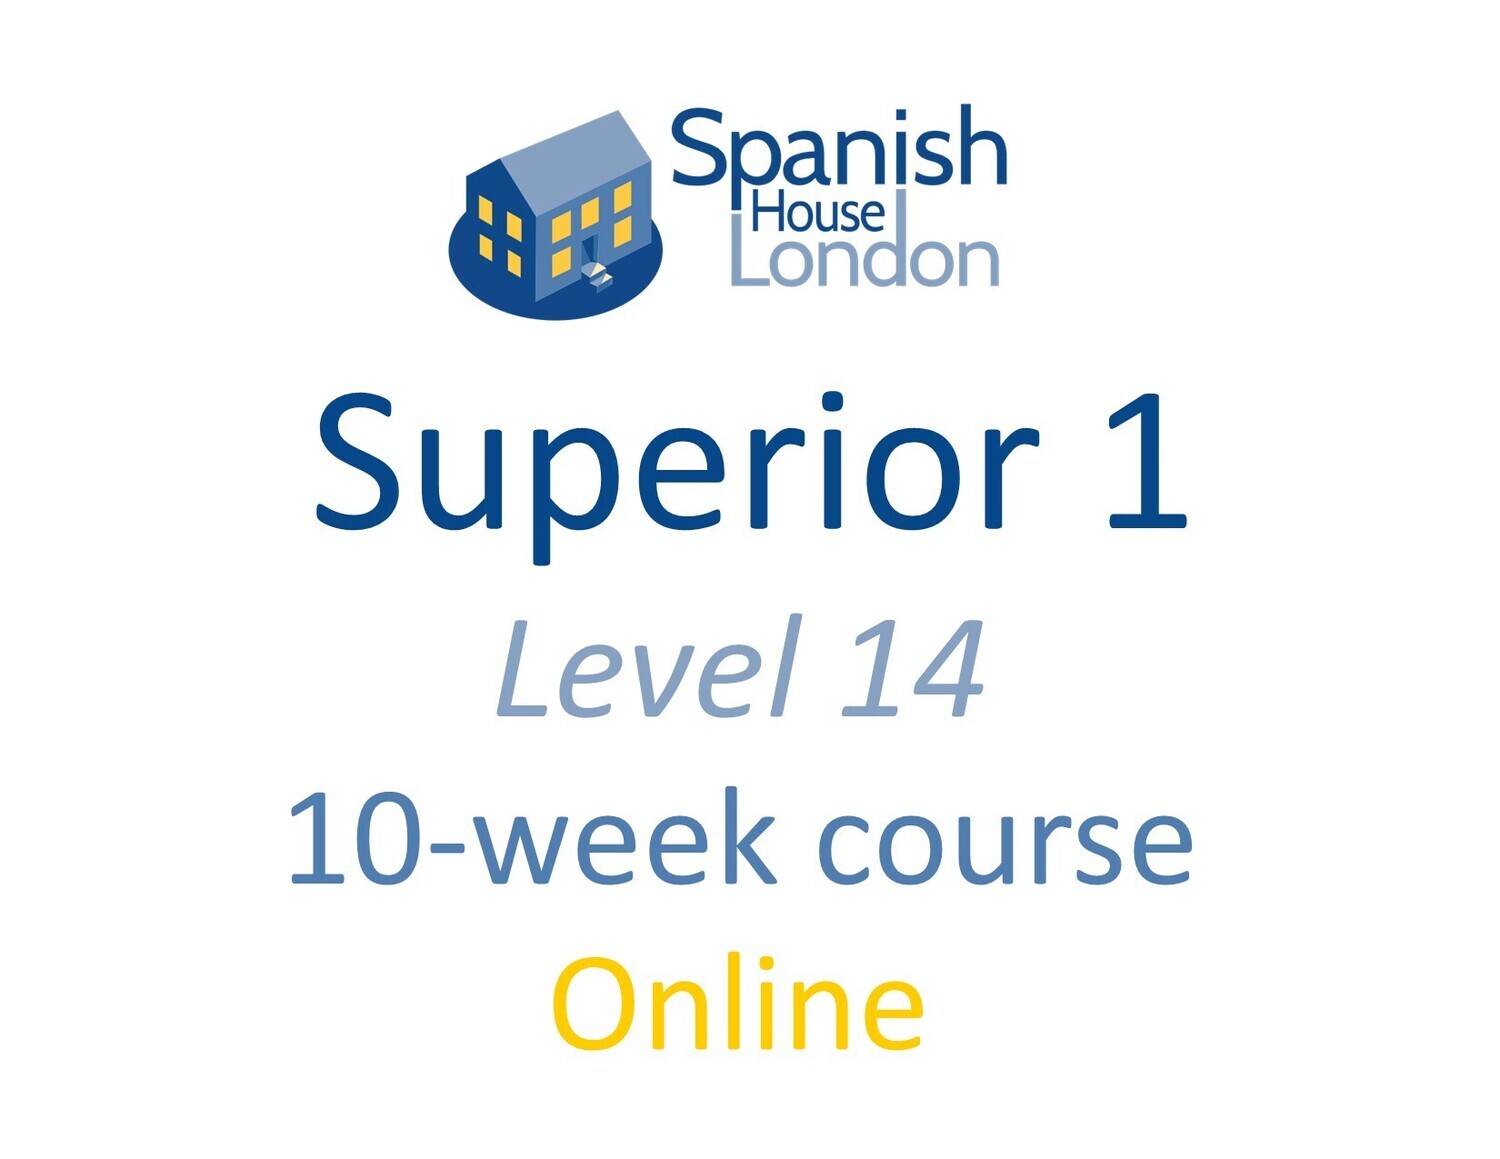 Superior 1 Course starting on 25th October at 6pm Online